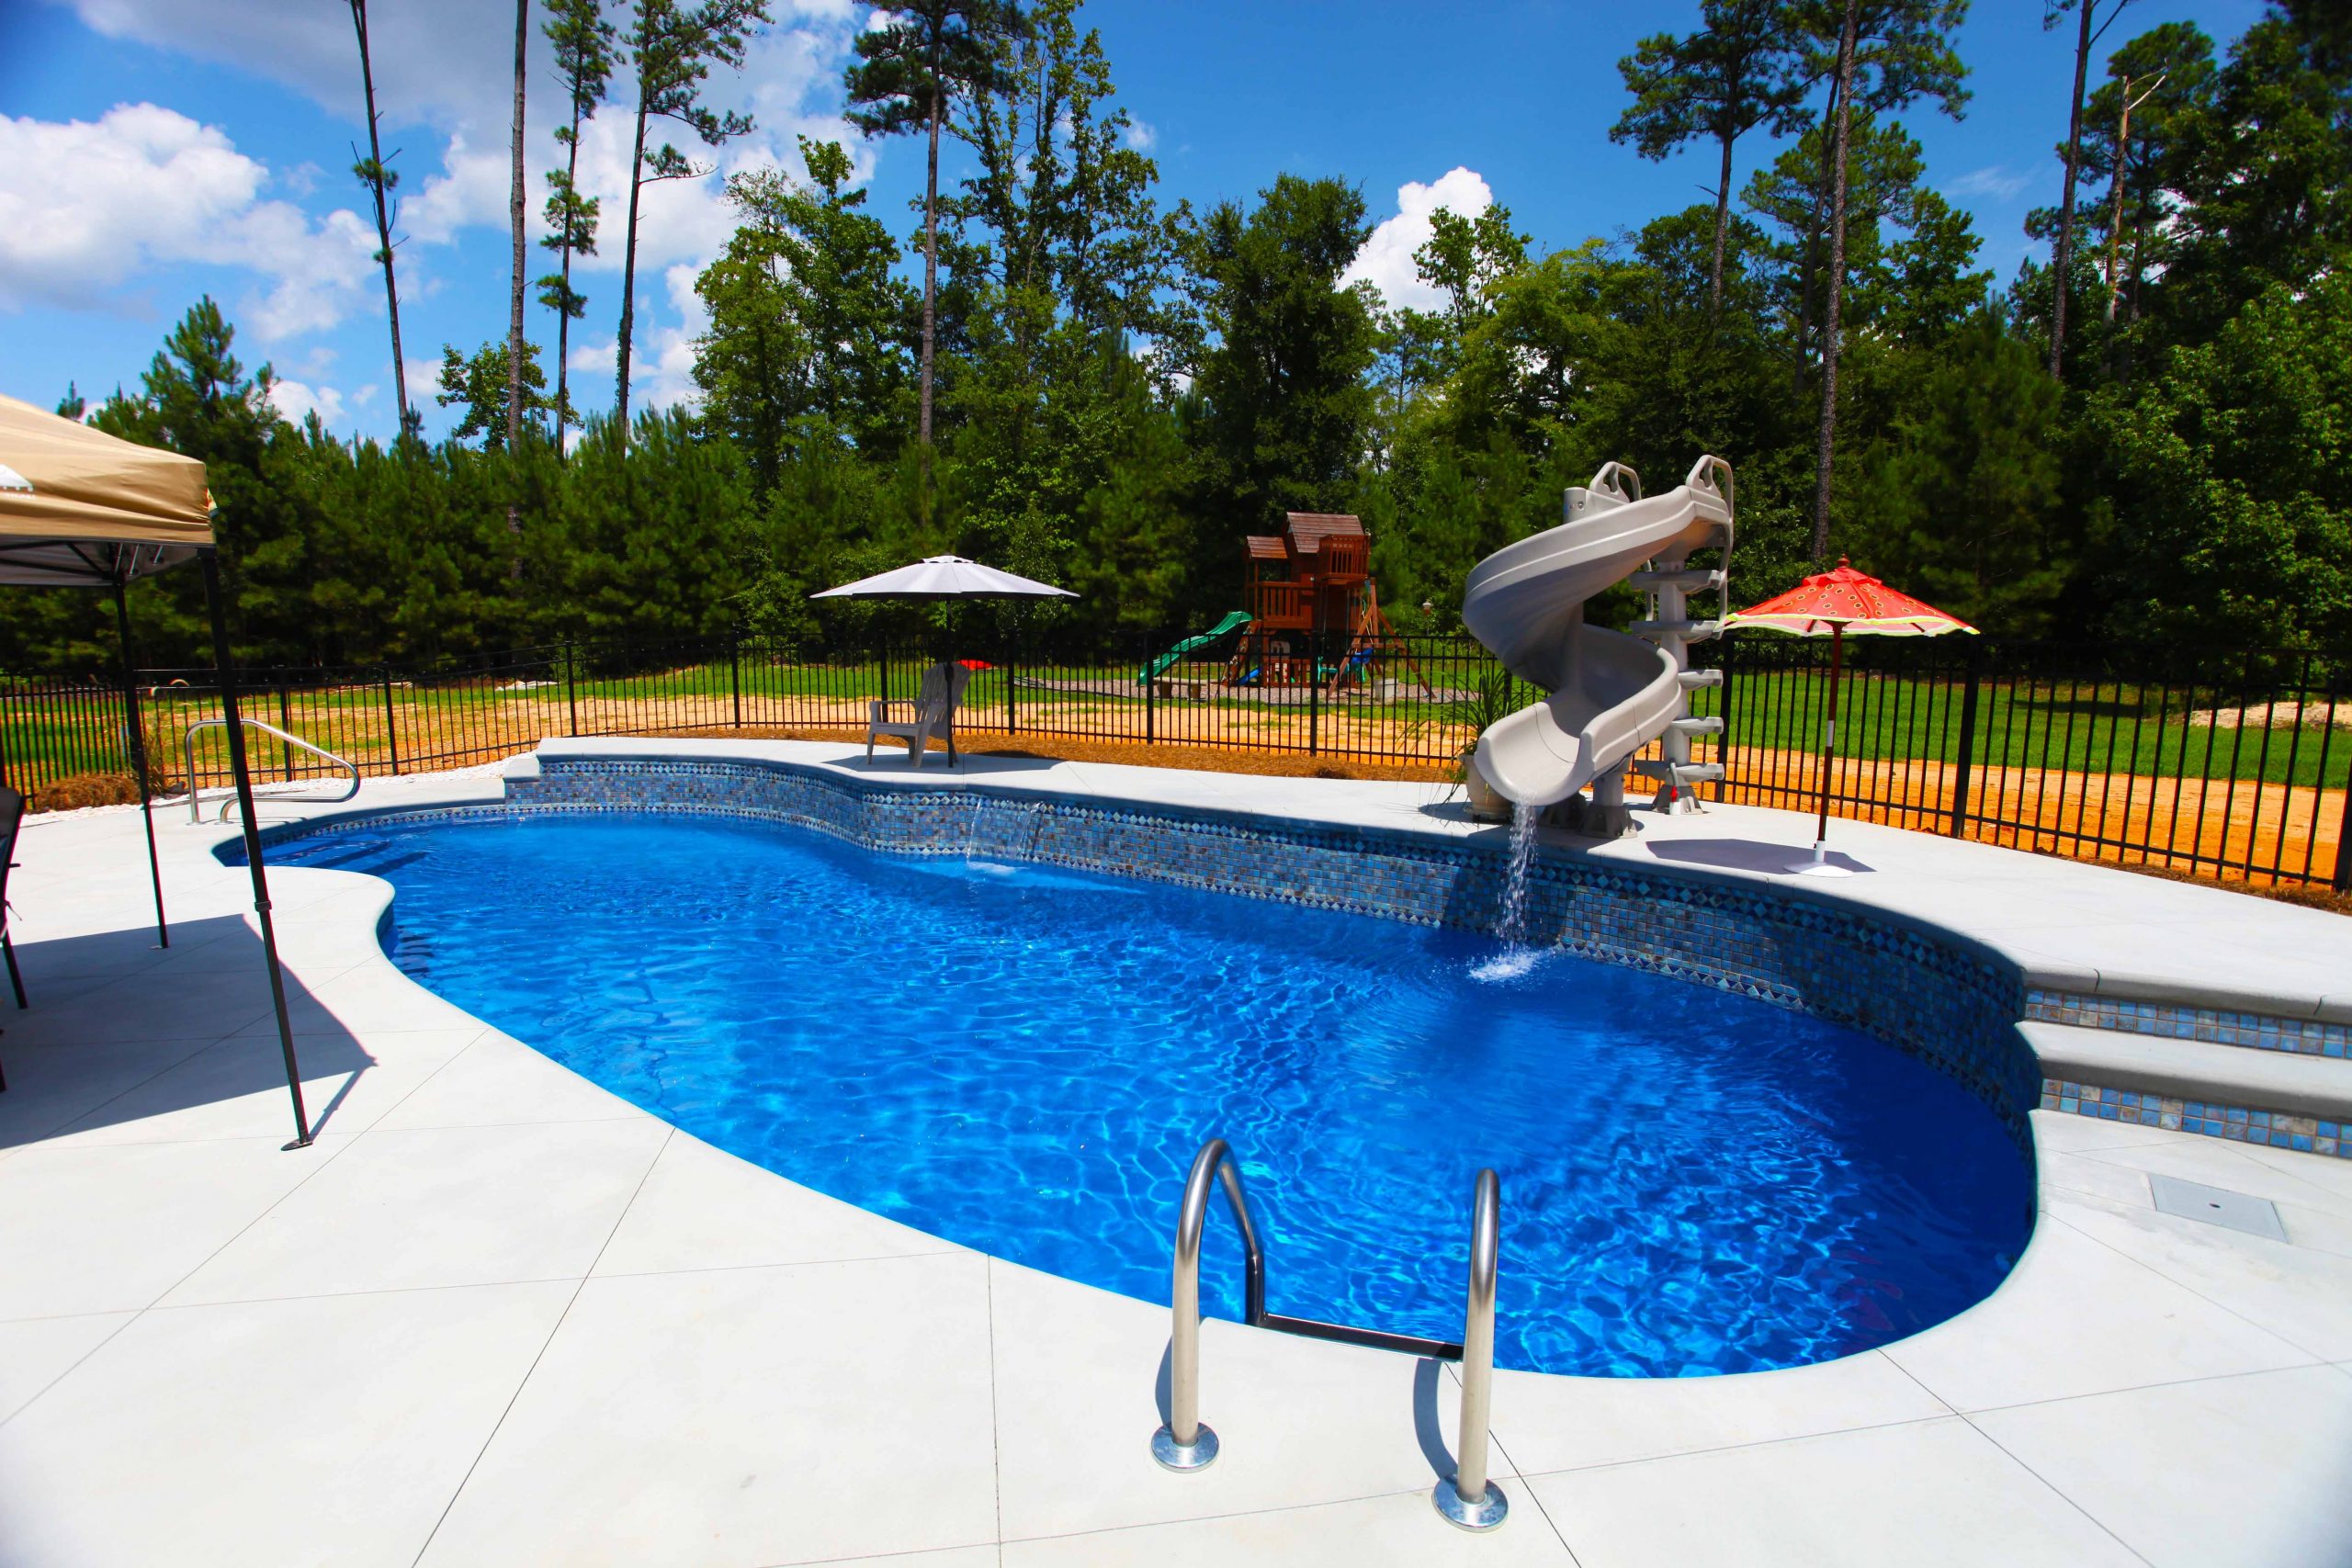 The Oasis is a free form fiberglass swimming pool designed to provide room for loads of summer fun.